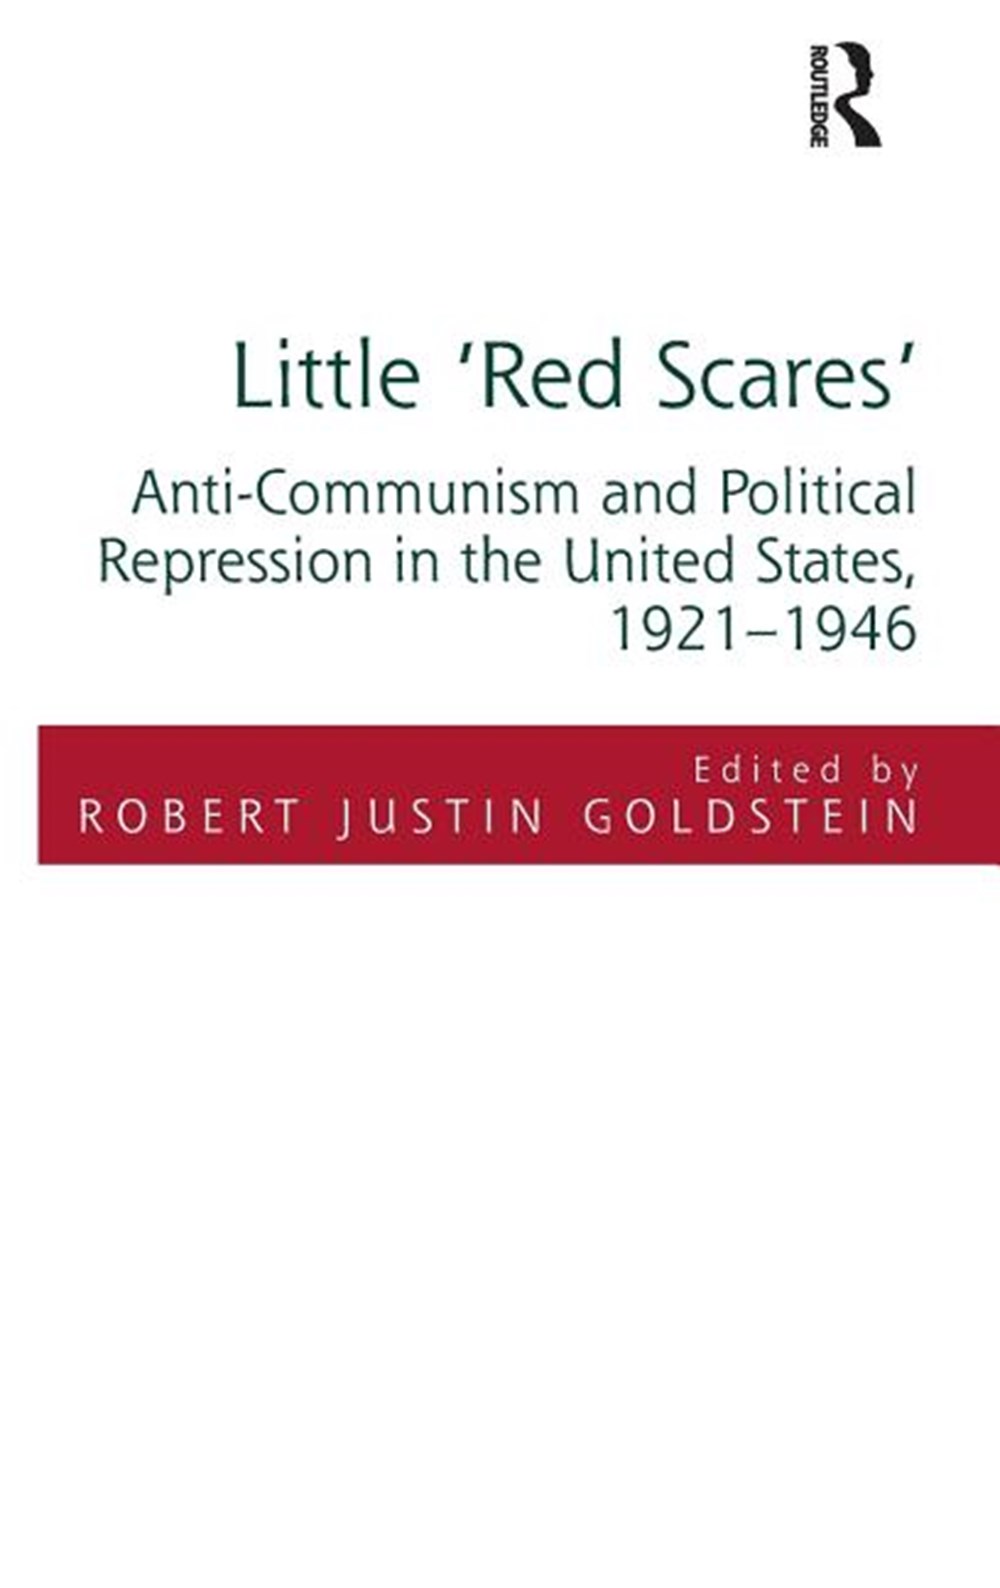 Little 'Red Scares': Anti-Communism and Political Repression in the United States, 1921-1946